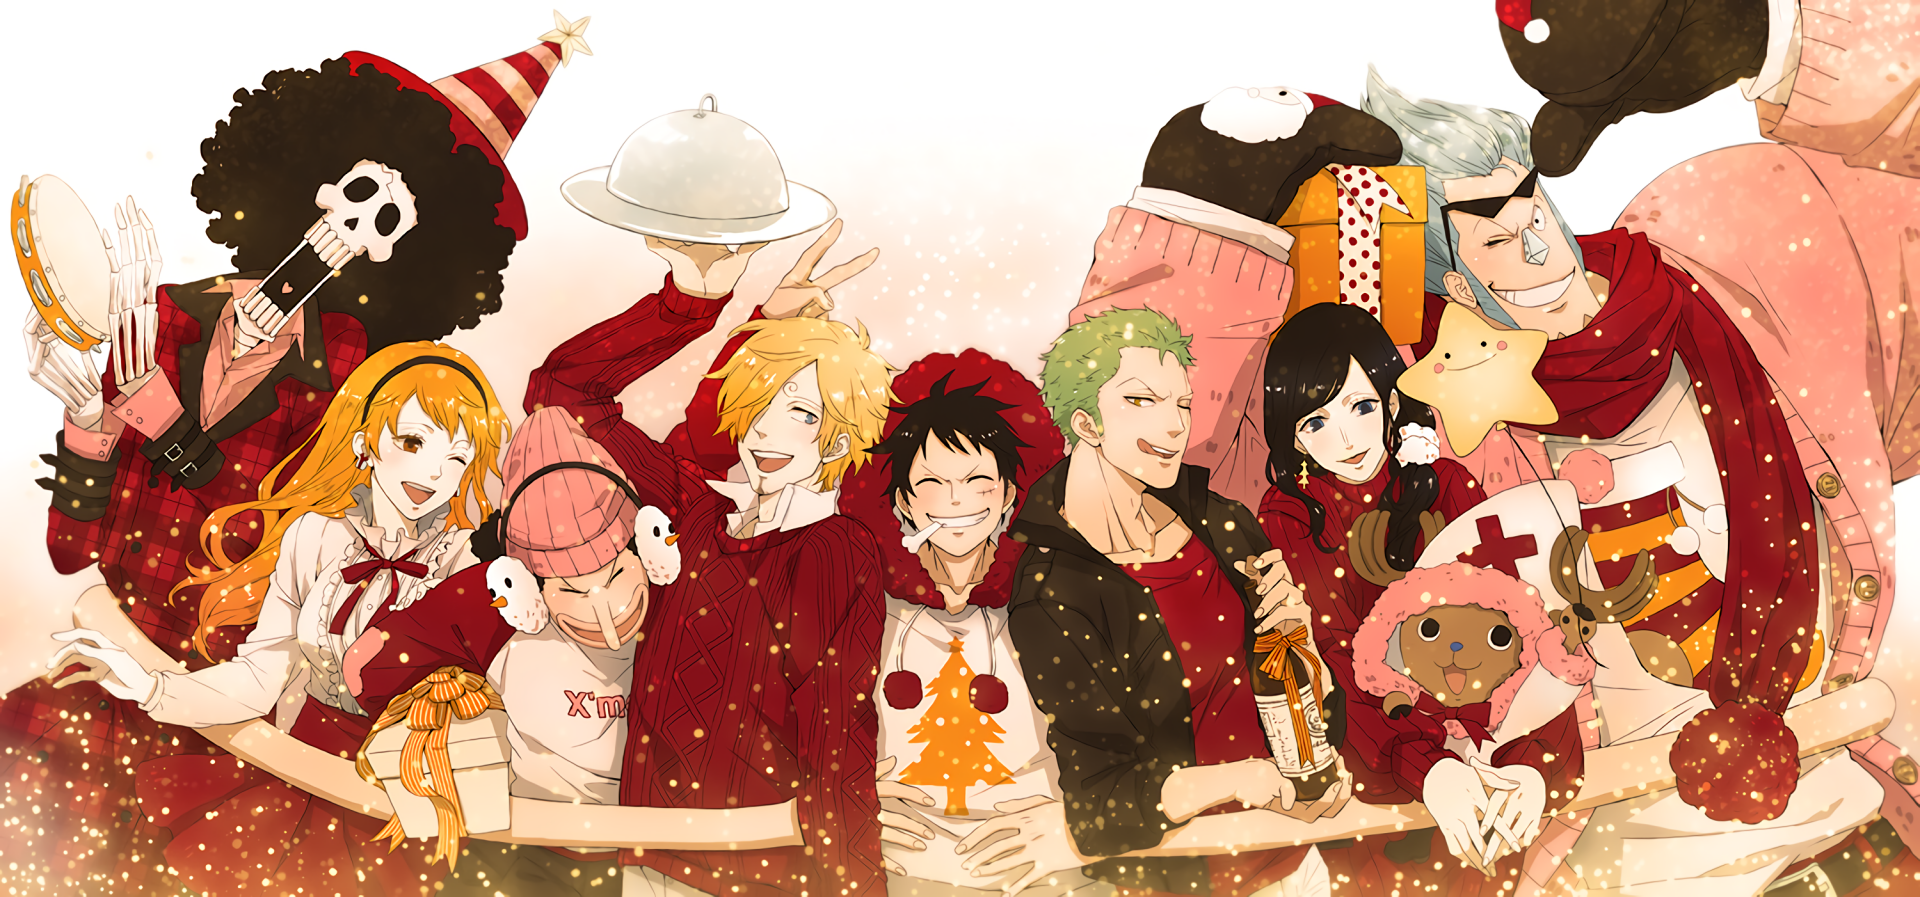 Straw Hats One Piece Wallpaper 1920x1080 4k Cars - IMAGESEE